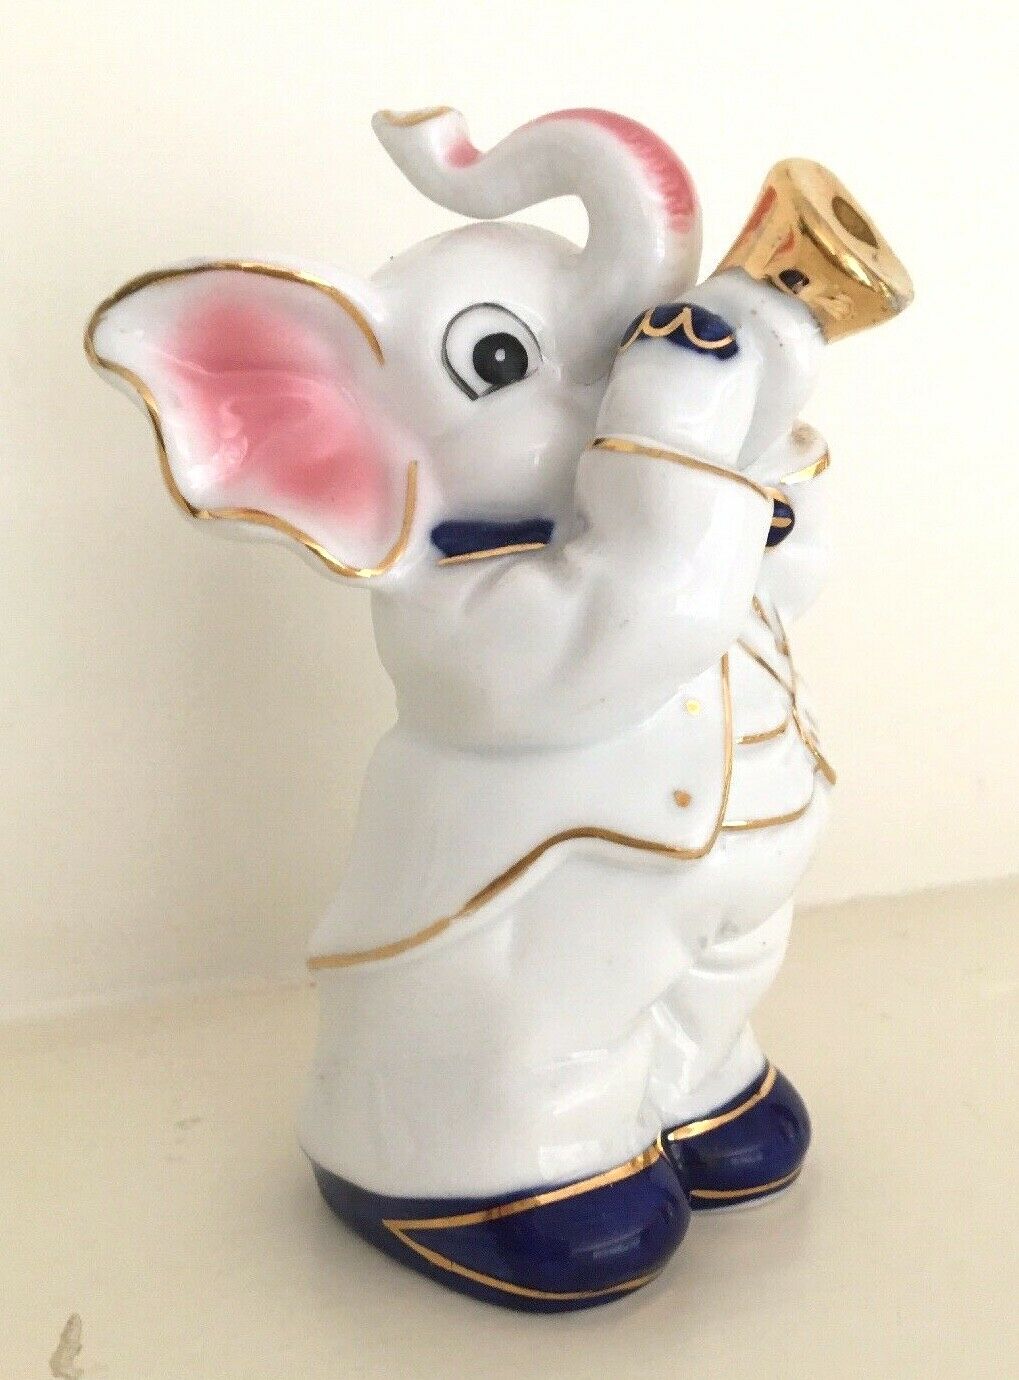 VINTAGE HAND PAINTED PORCELAIN ELEPHANT WITH TRUMPET PIGGY COIN BANK BABY GIFT